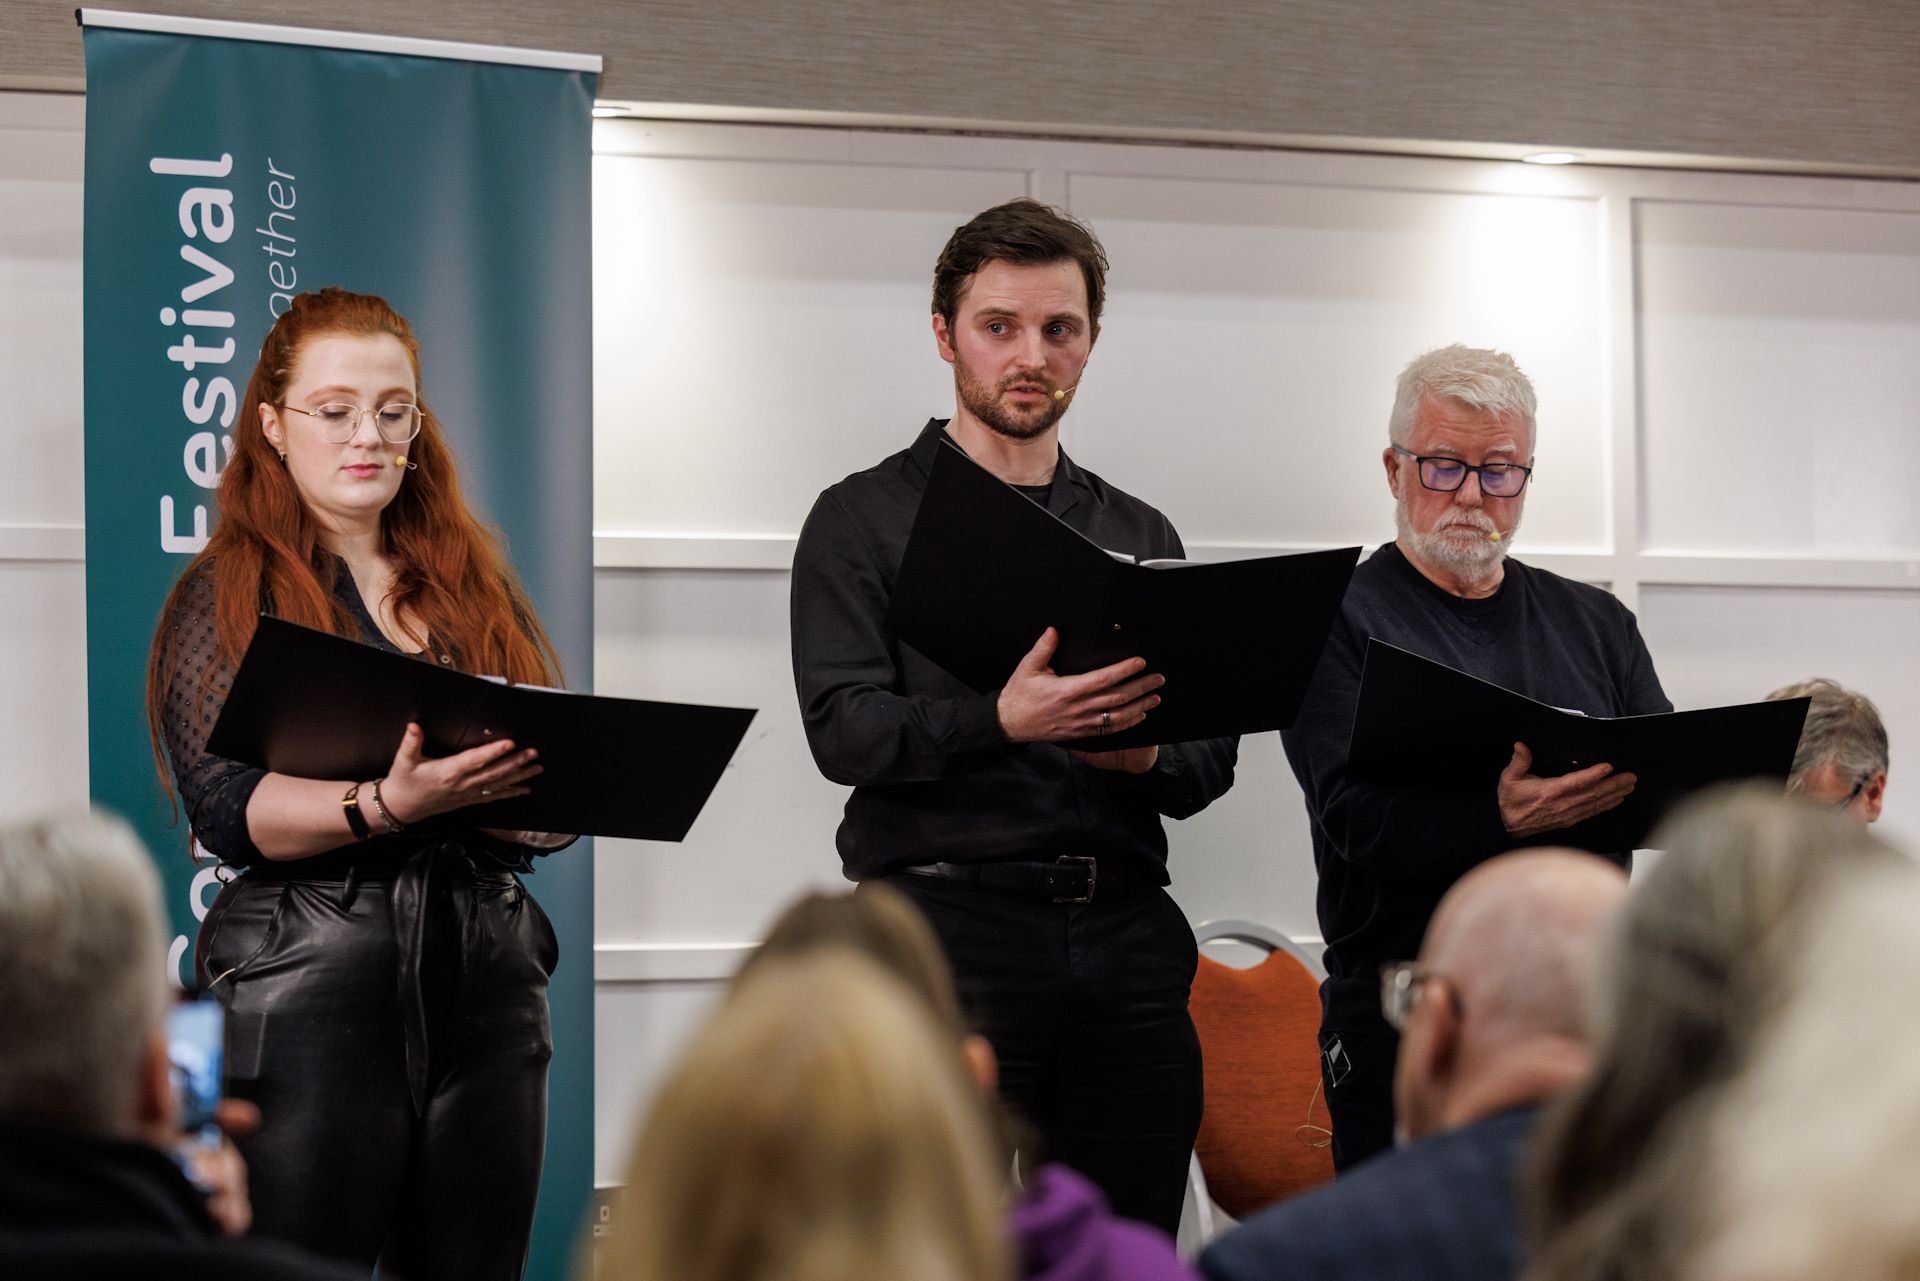 STORYTIME: Eleanor Shannon, Glenn McGivern and Trevor Gill from the Bright Umbrella Theatre troupe in East Belfast read excerpts from the chosen books at the 4 Corners Festival stories\' event